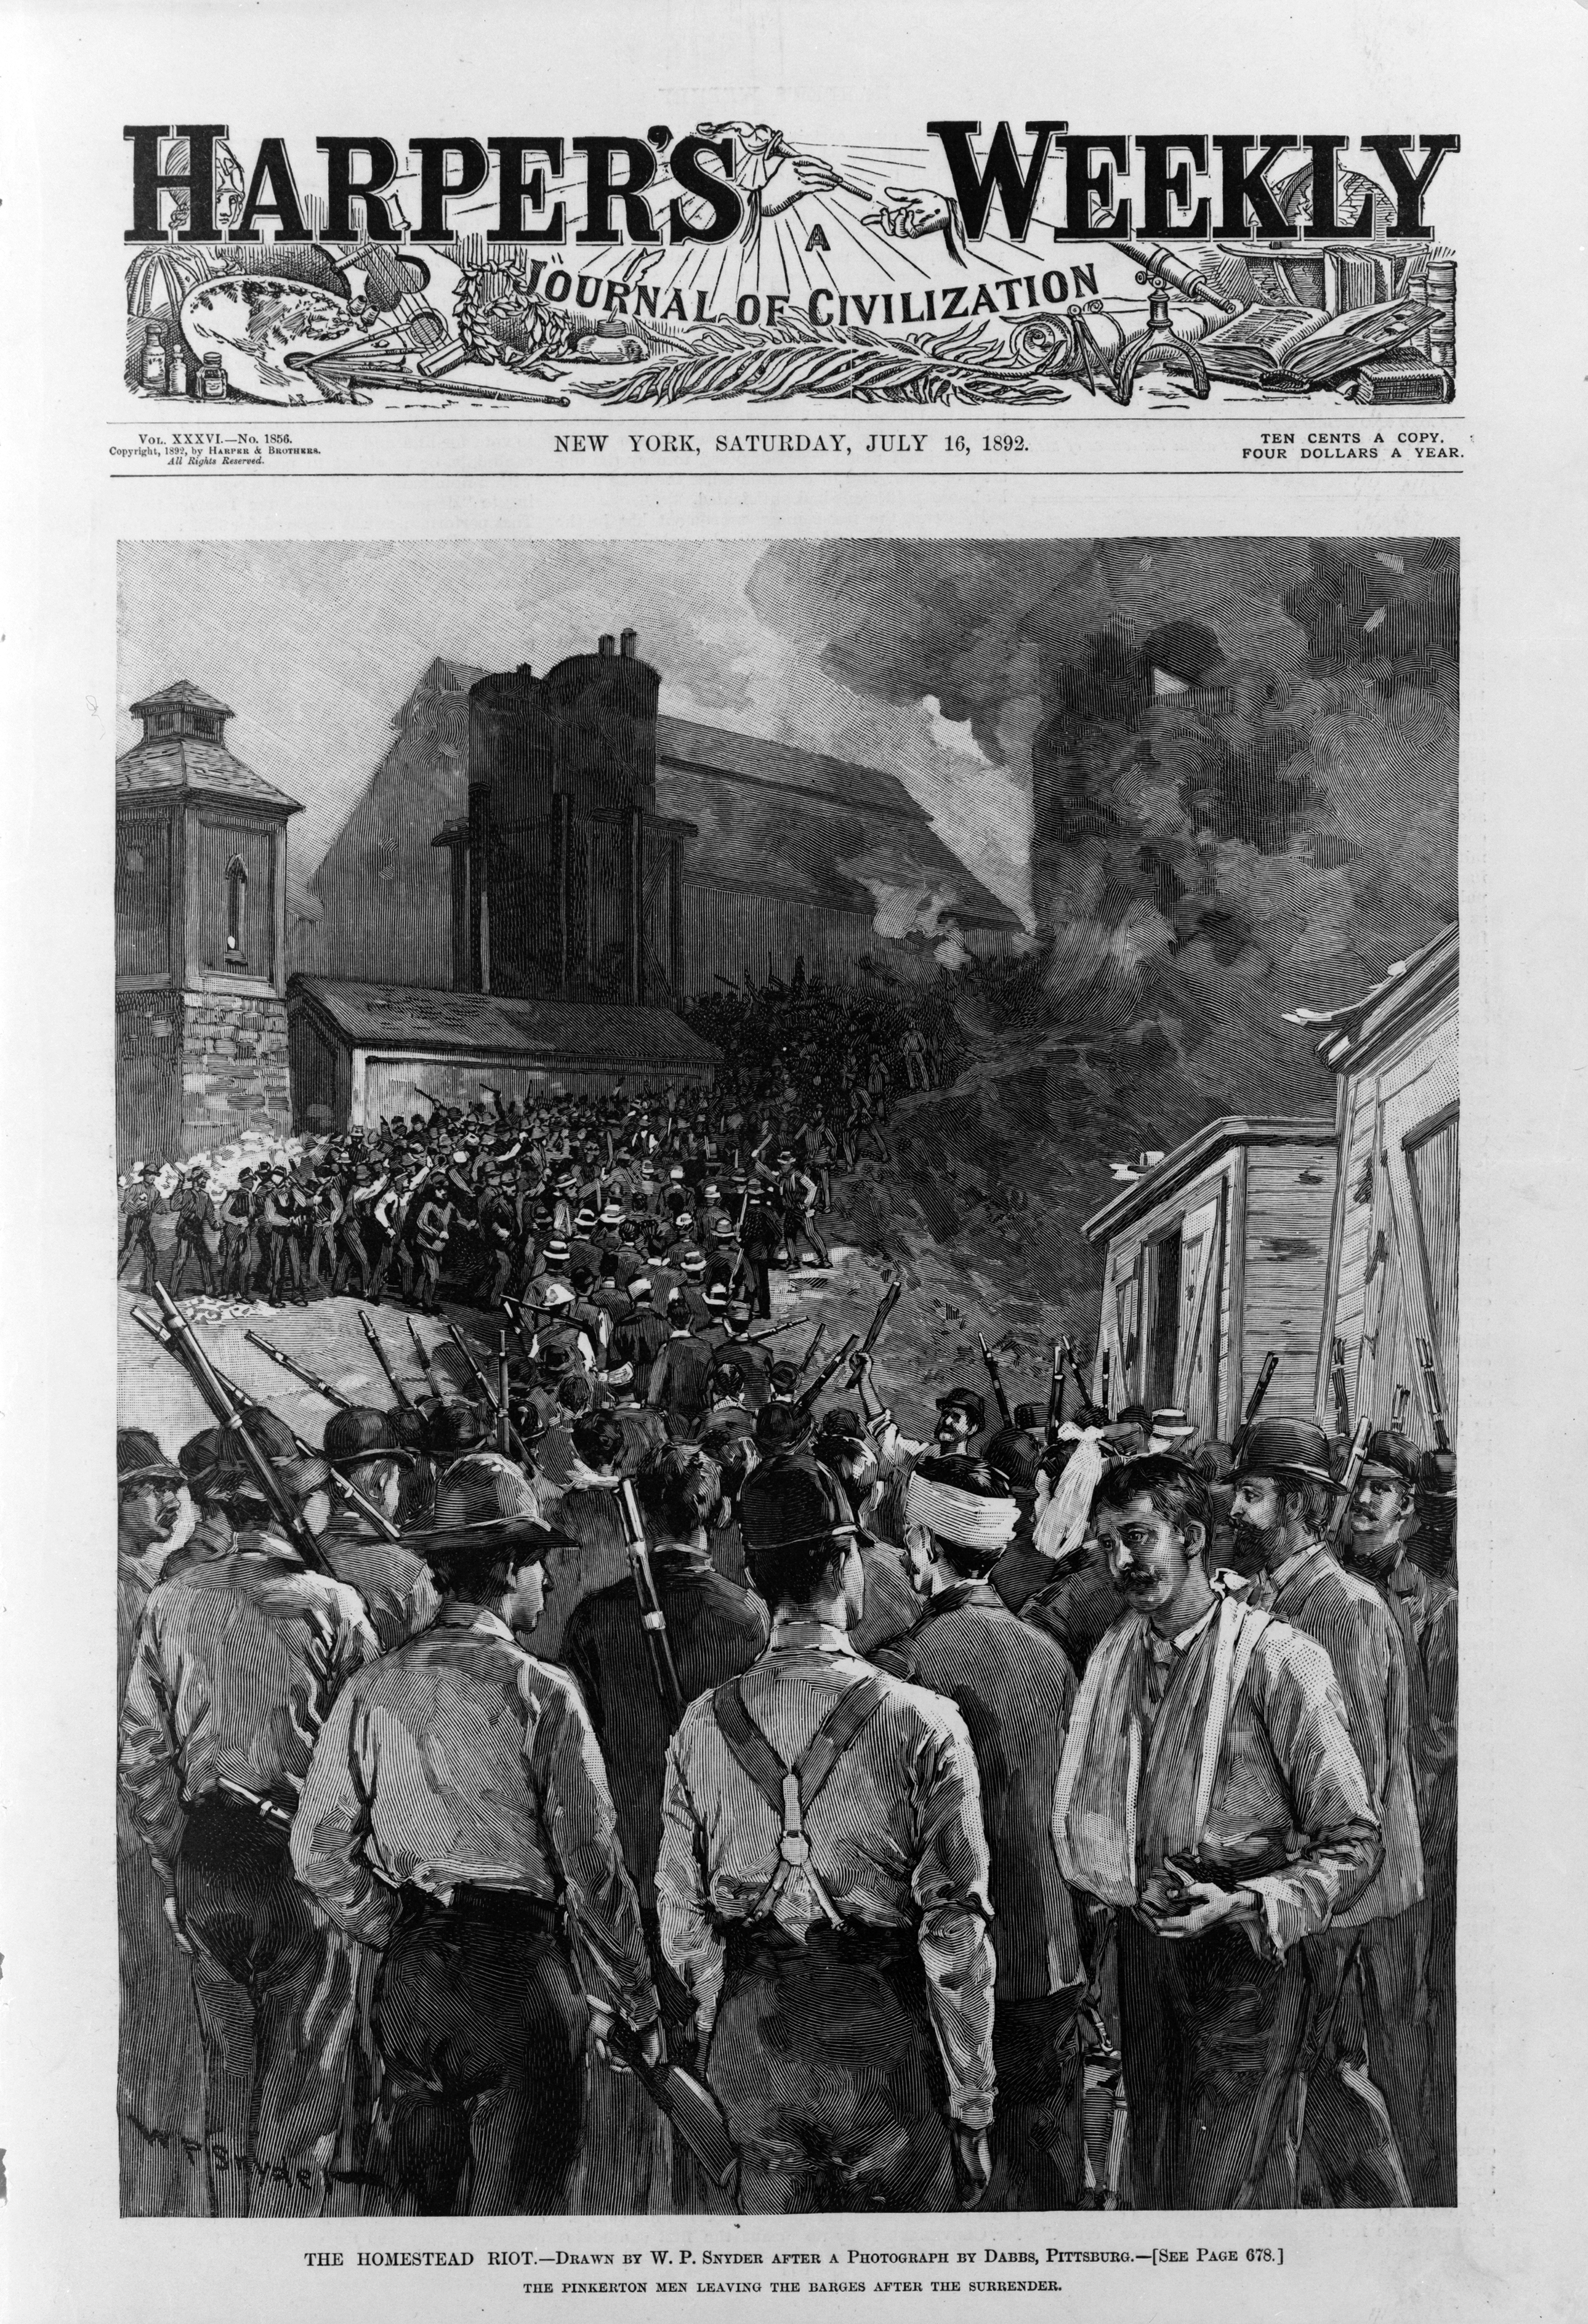 The Homestead Strike made the cover of 'Harpers Weekly' in '92, but it would be years before organized labor recovered.